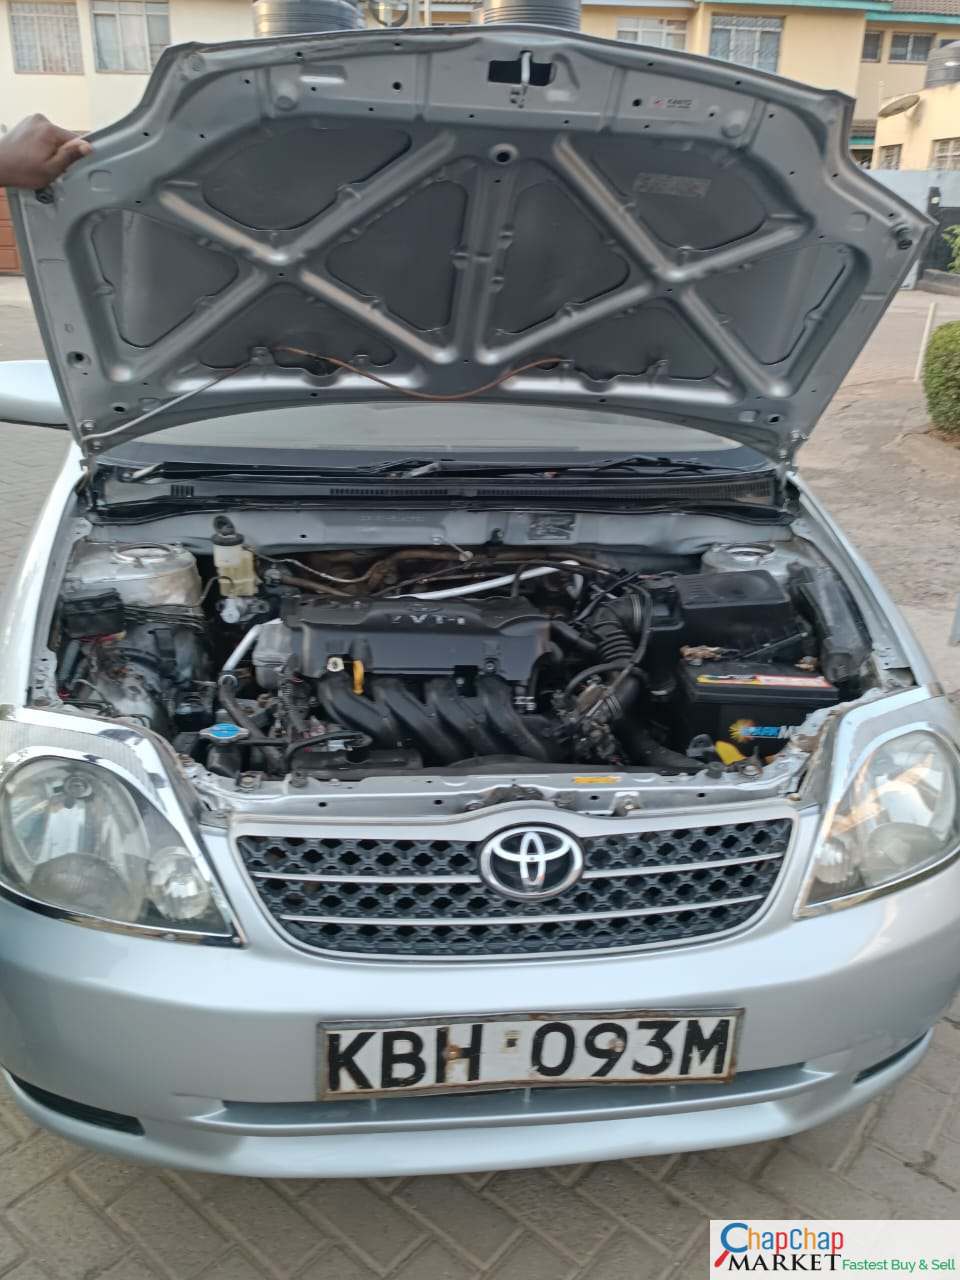 Toyota Corolla NZE QUICK SALE You Pay 30% Deposit Trade in OK Wow